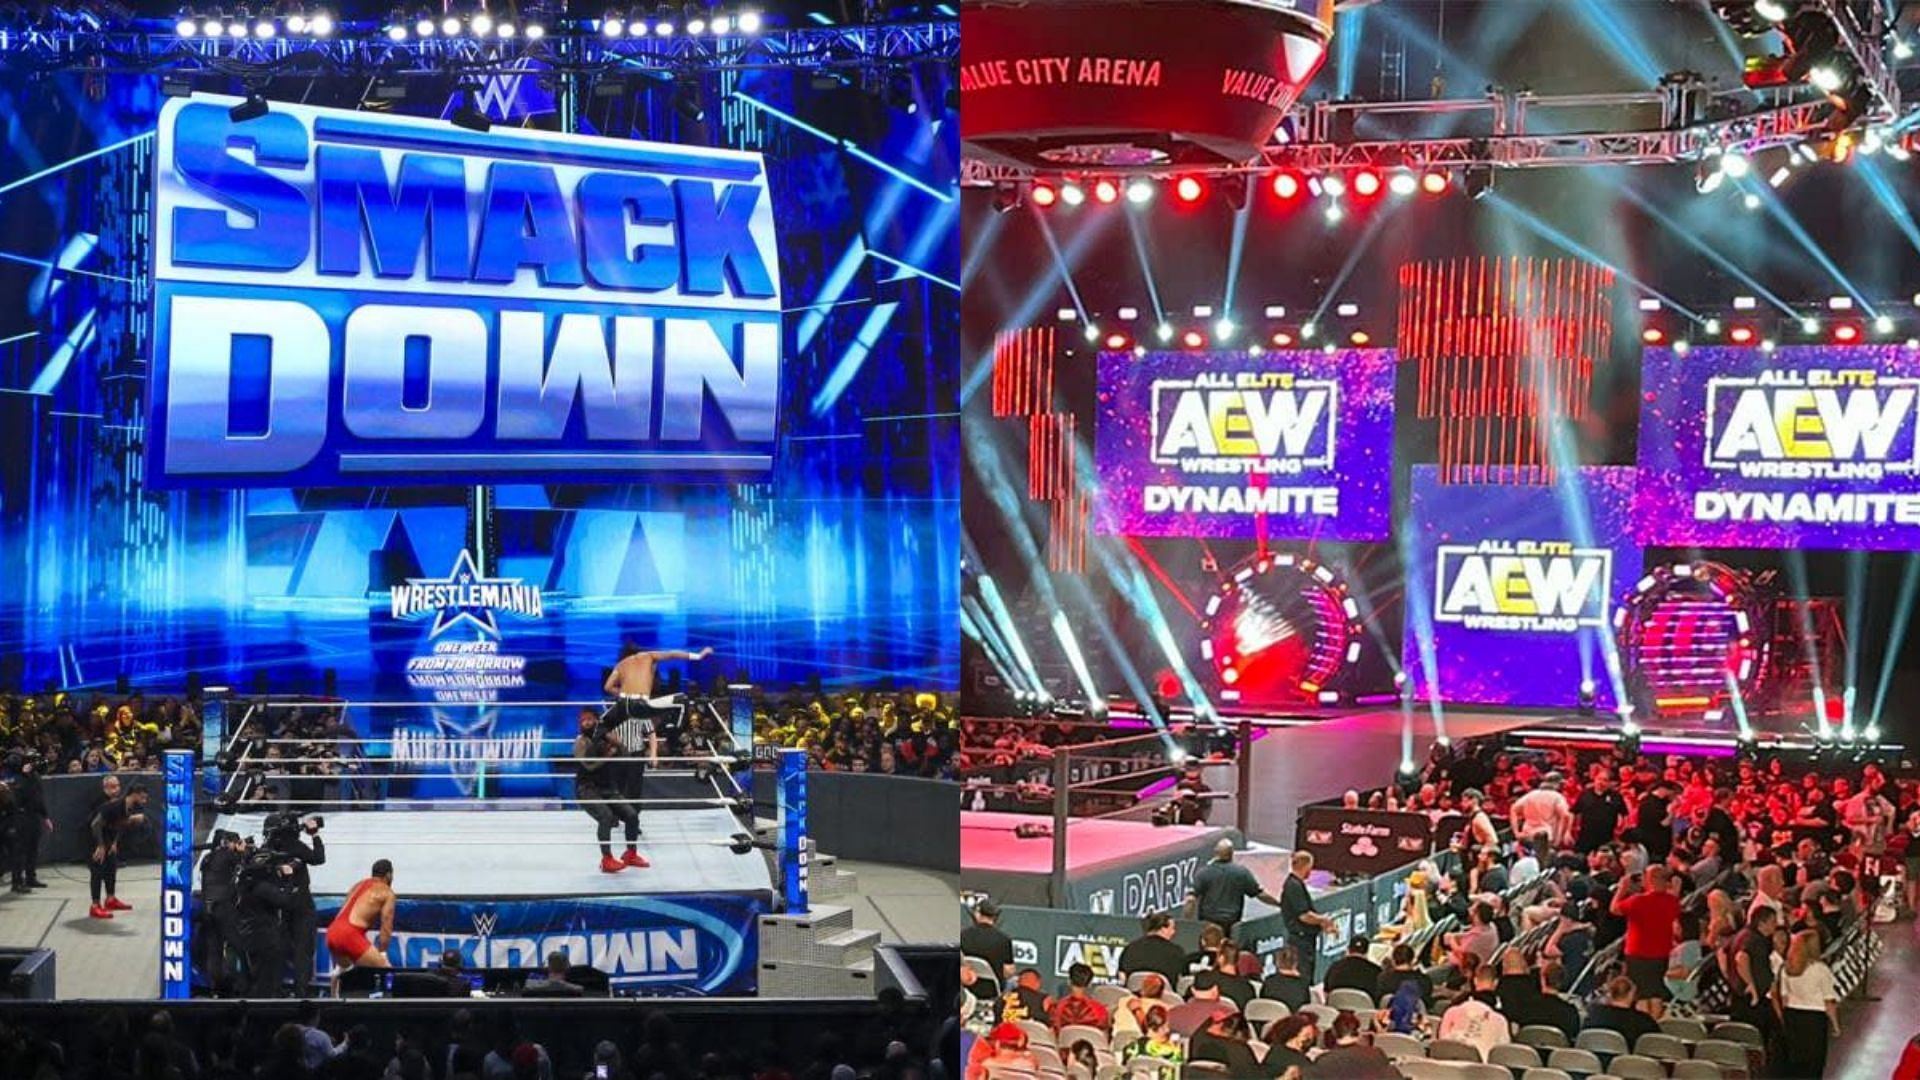 Could this motion give AEW an edge over WWE?